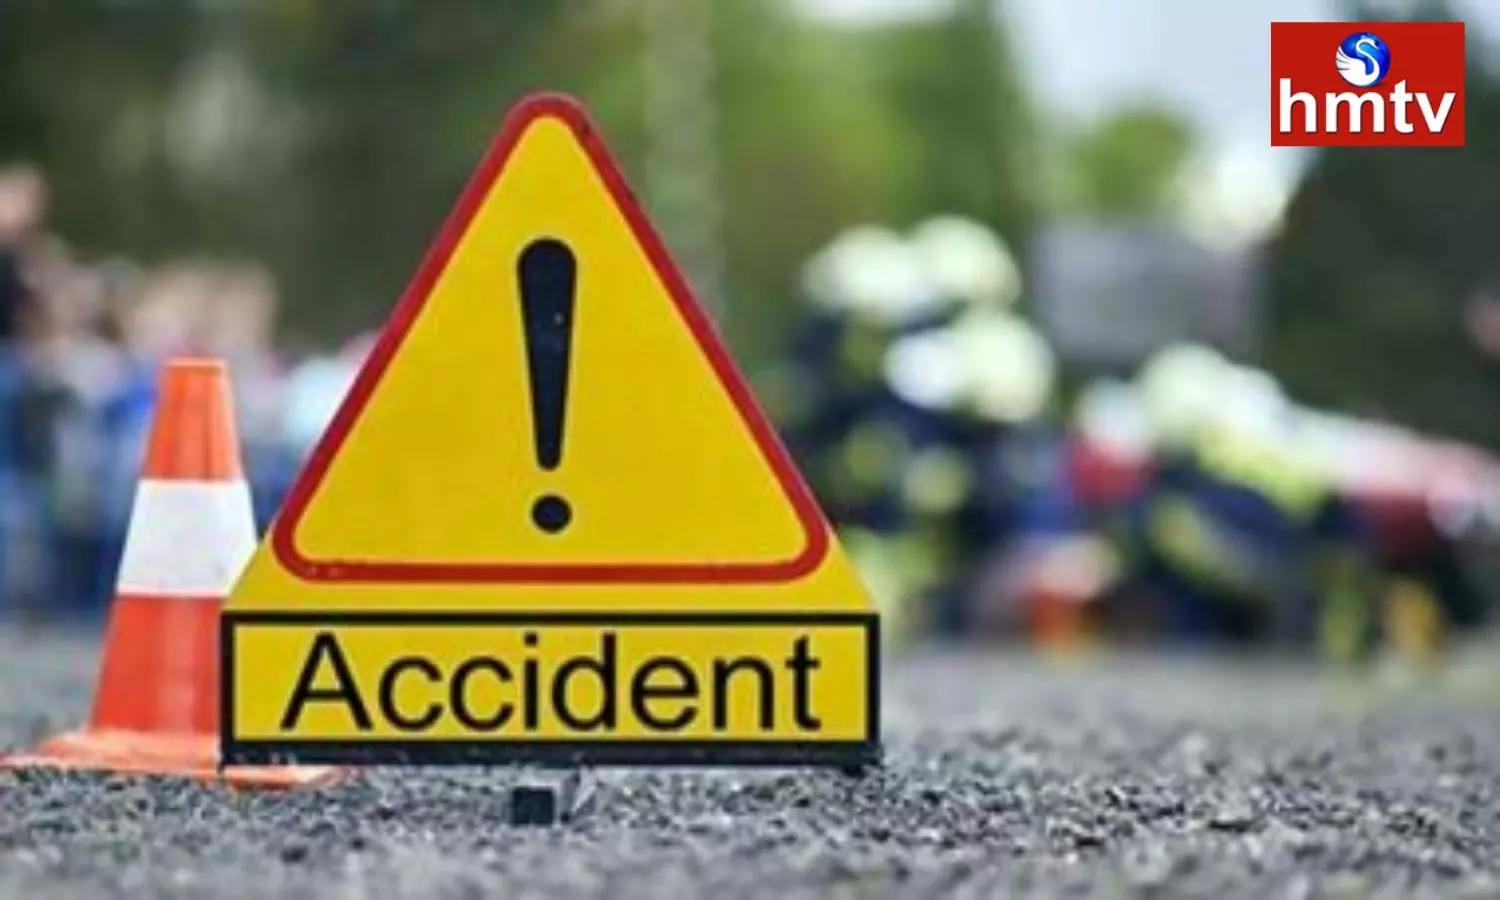 Four Ayyappa Devotees Were Killed and Many injured in a Road Accident in Bapatla District